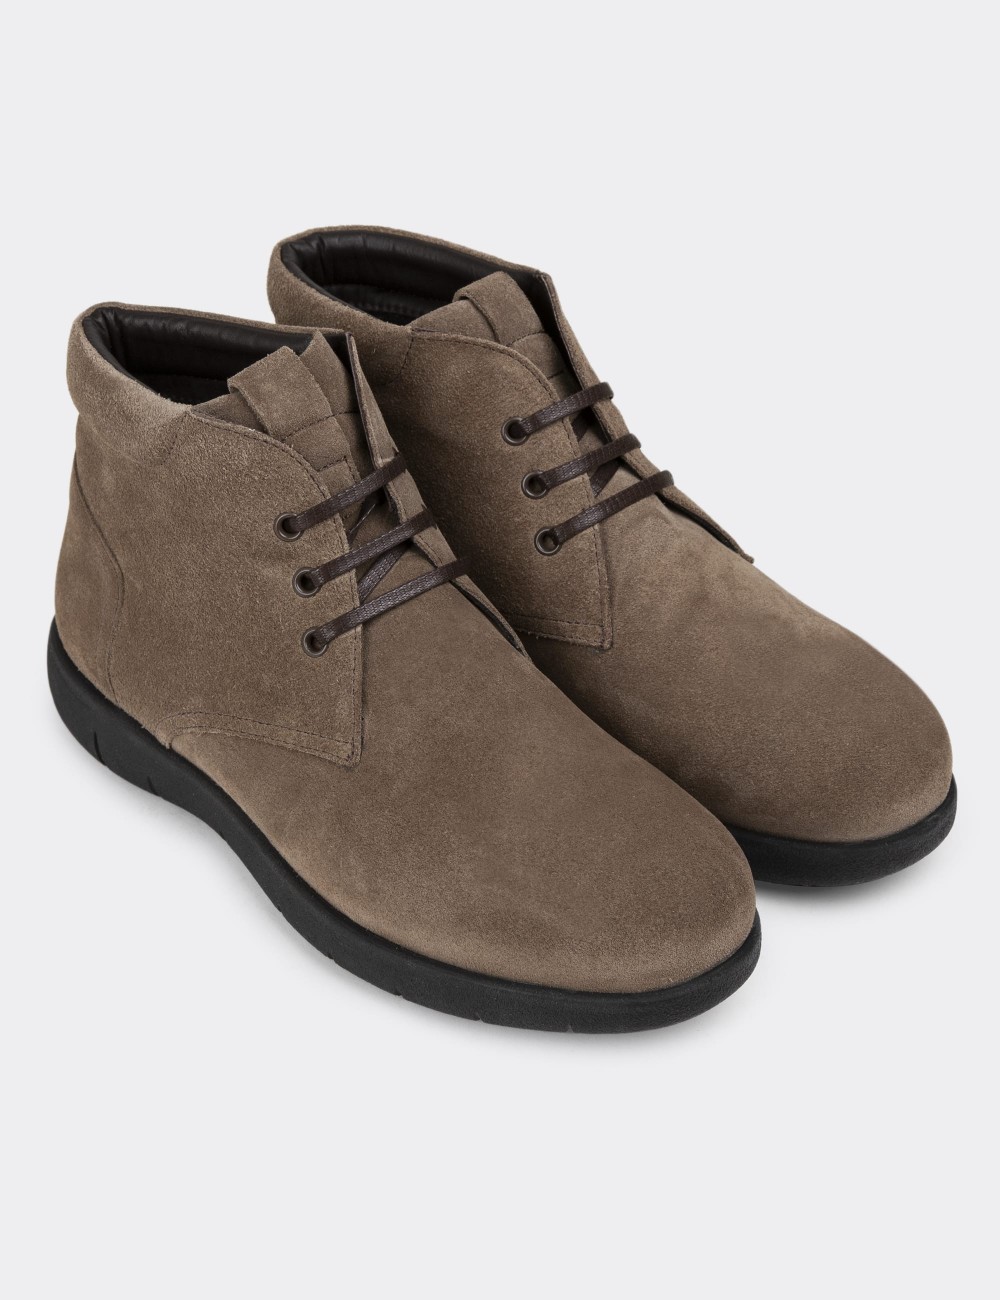 Sandstone Suede Leather Boots - 01948MVZNC01